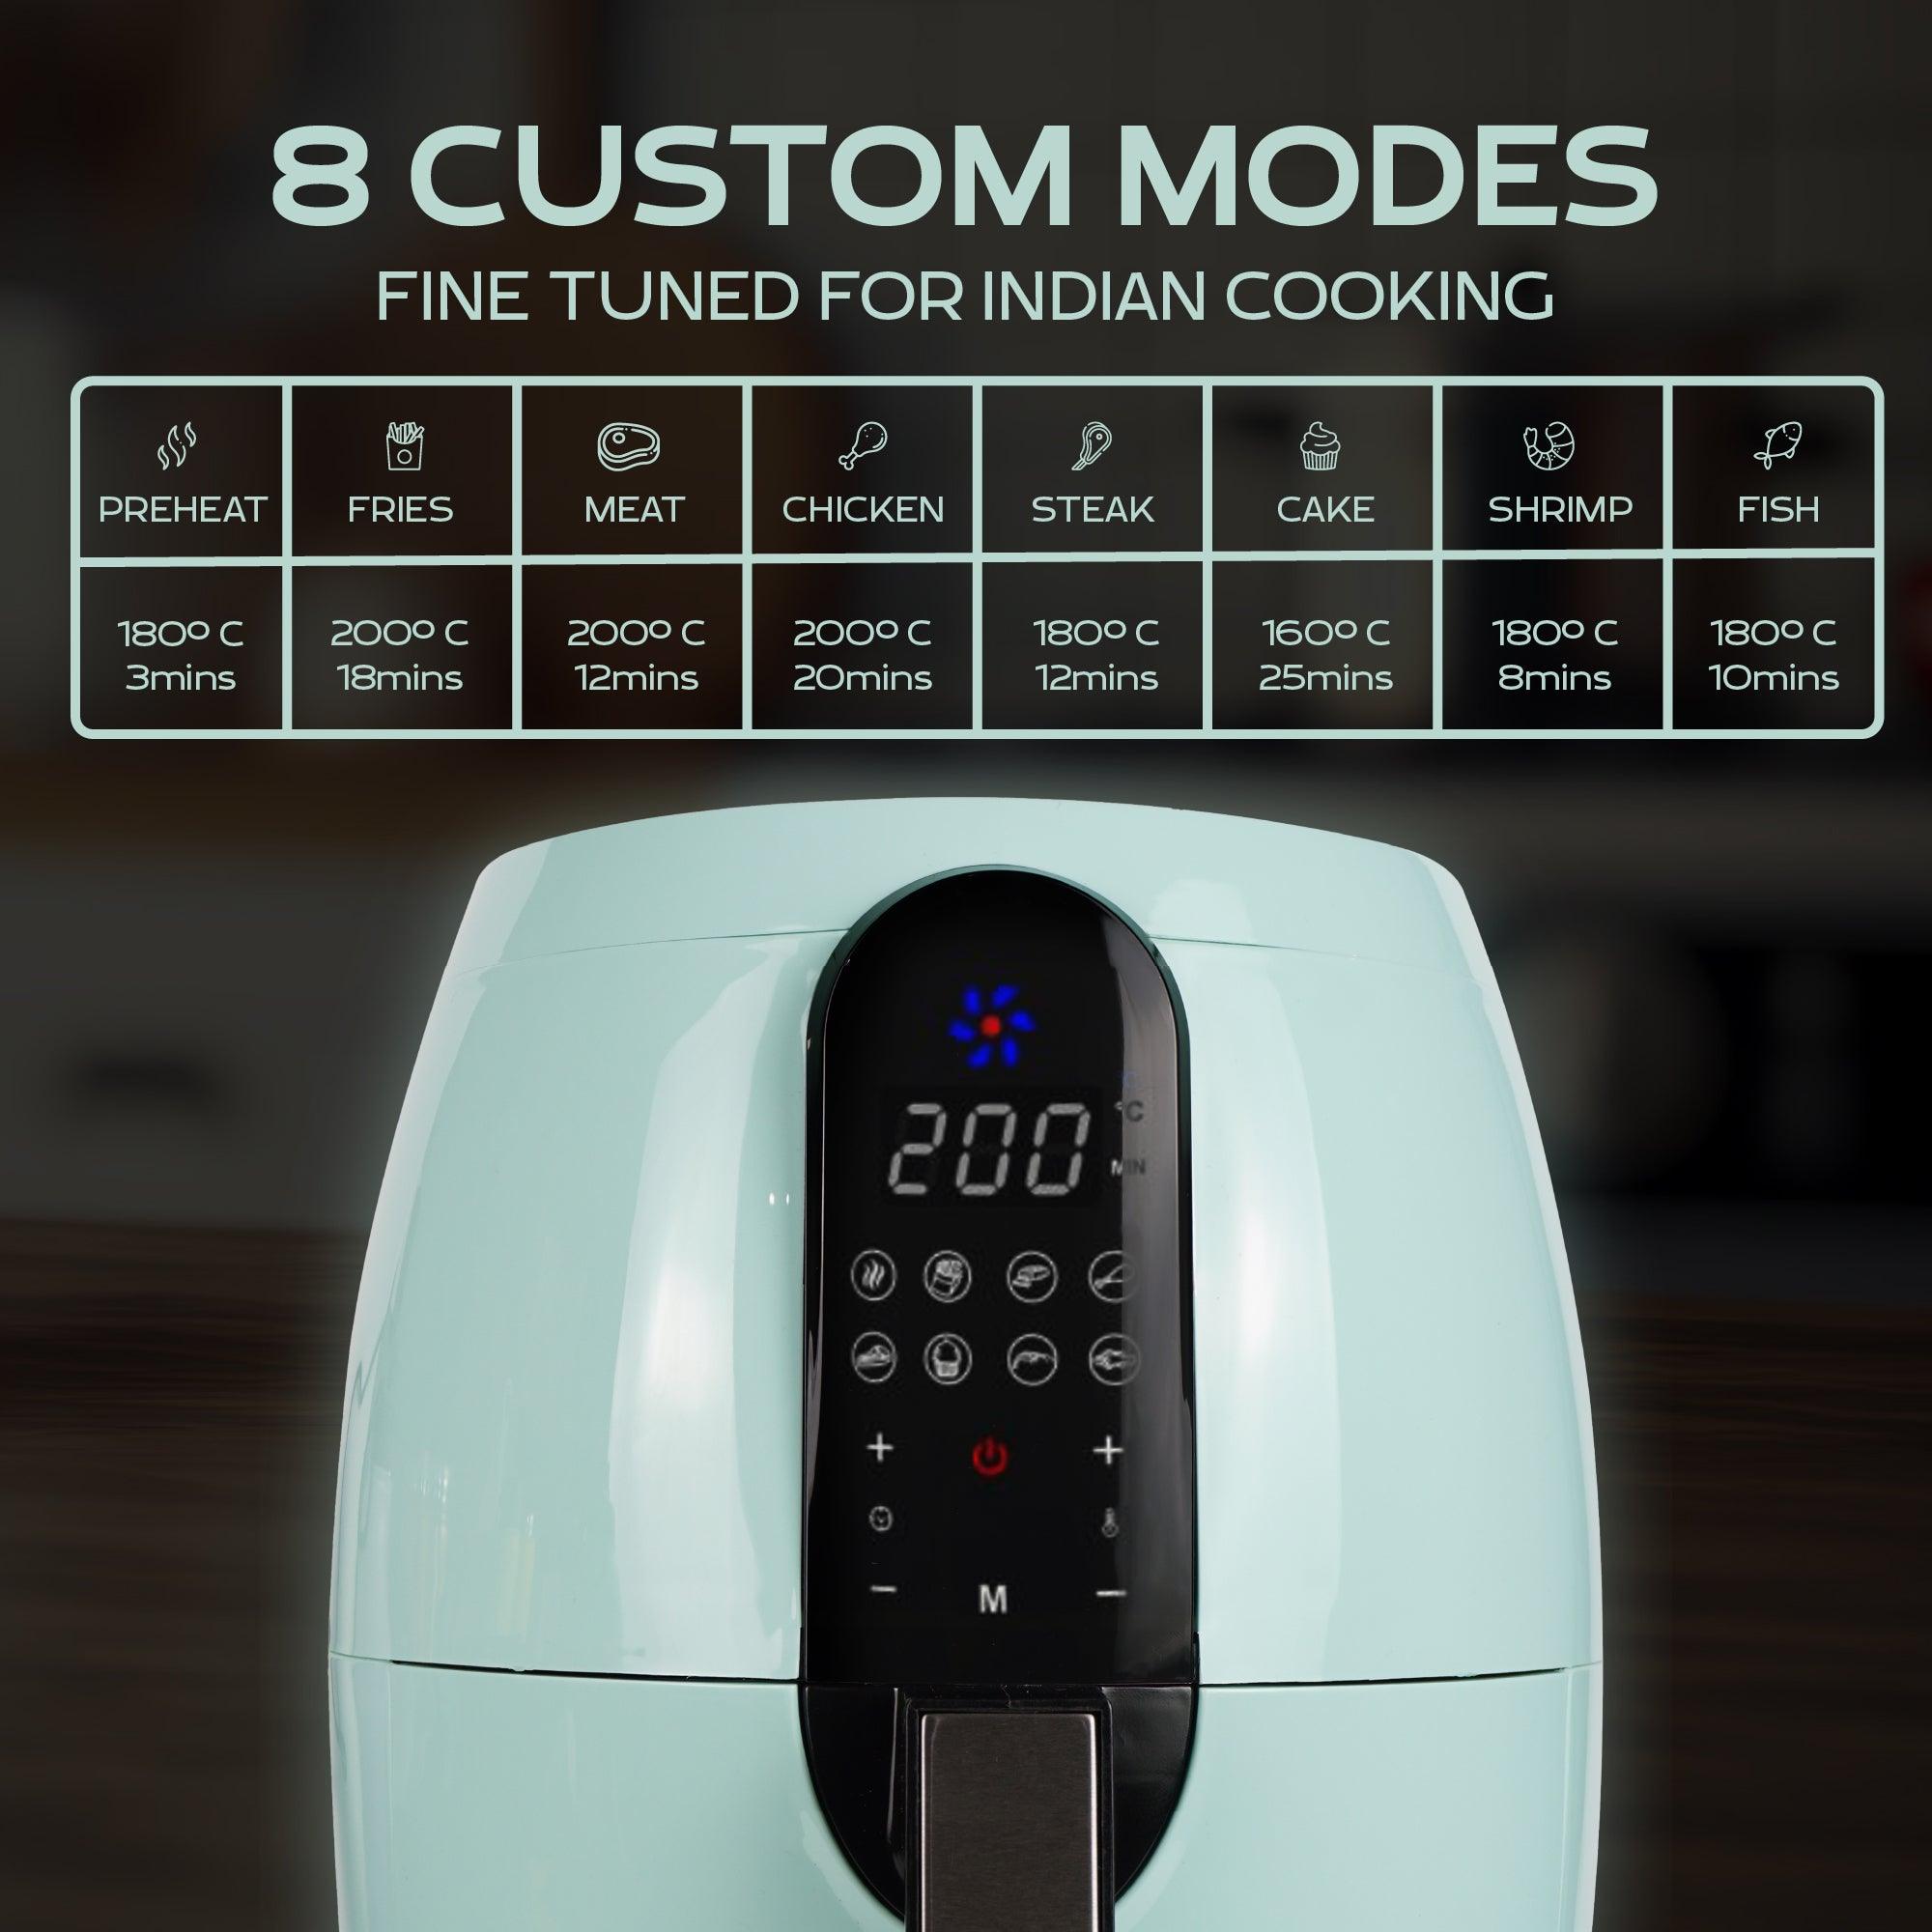 Solara Digital Air Fryer for Home Kitchen with mobile app - Solara Home